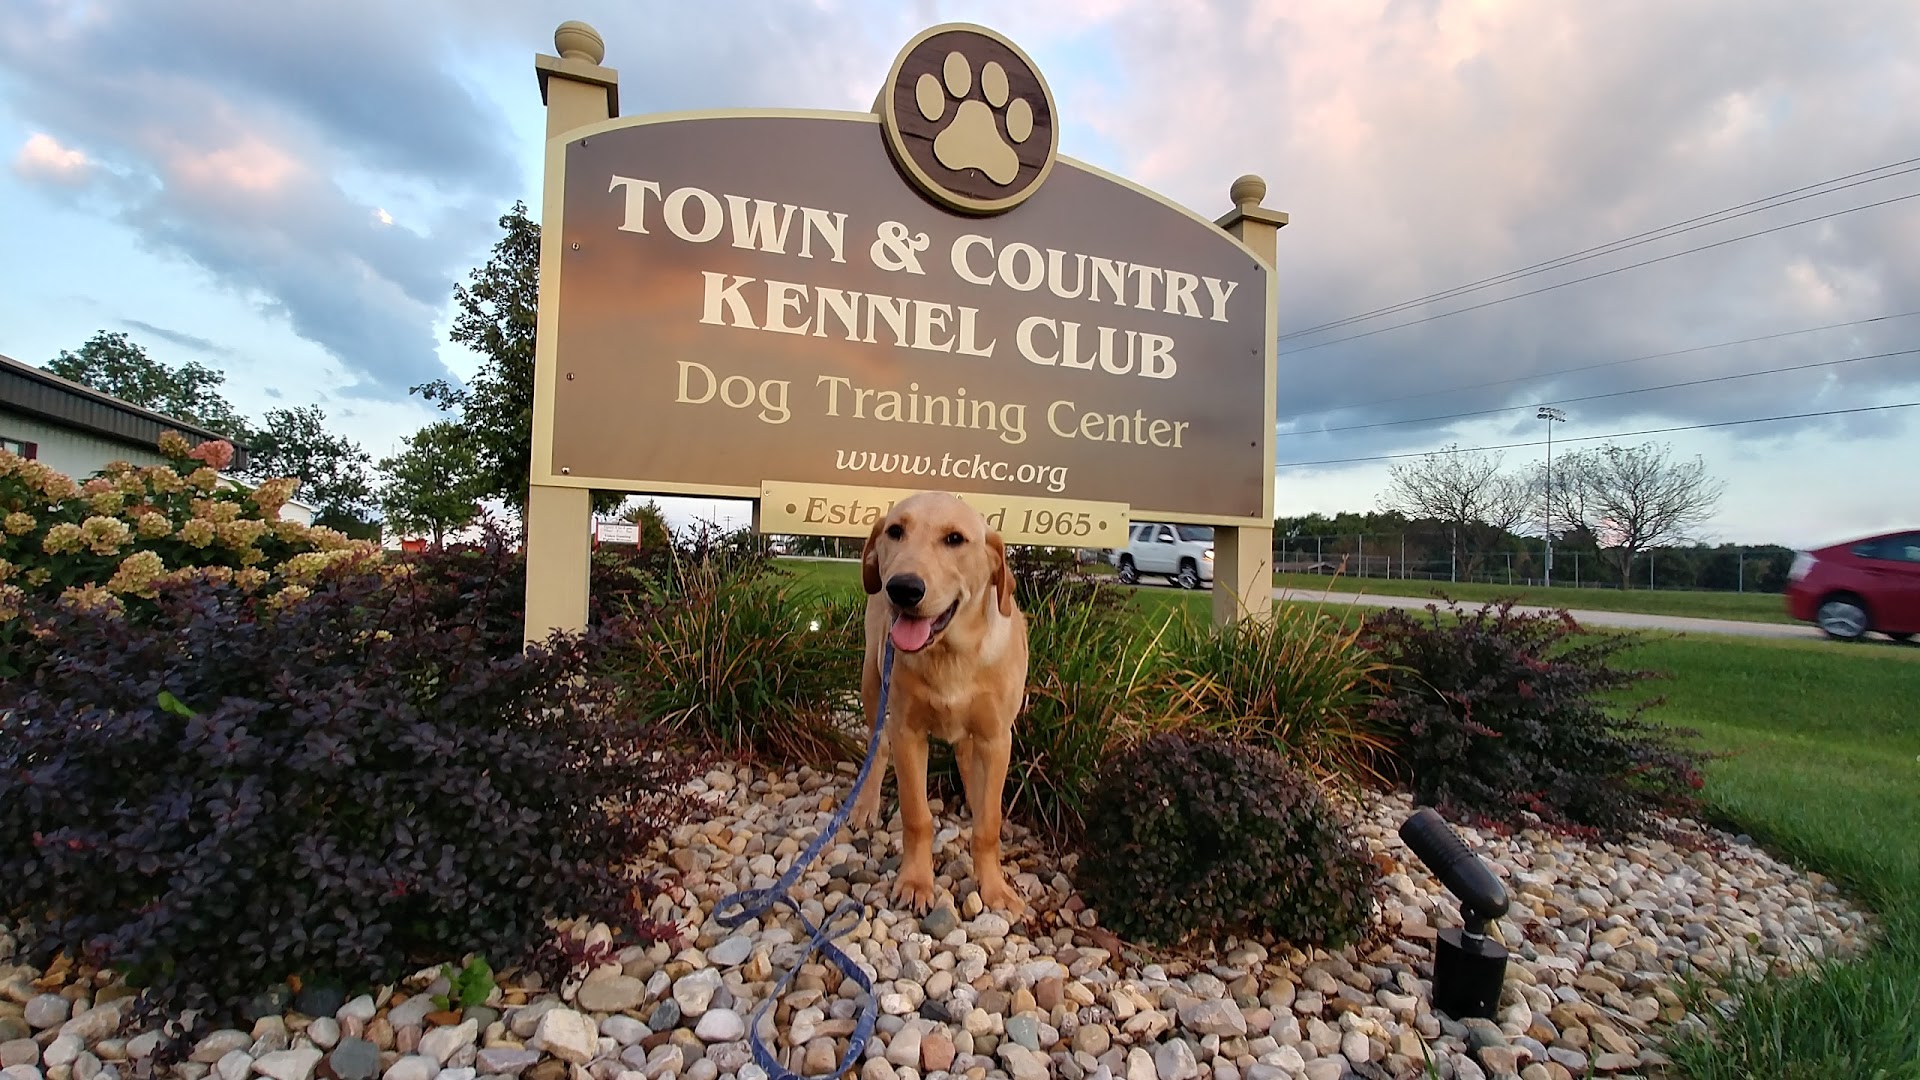 Town & Country Kennel Club